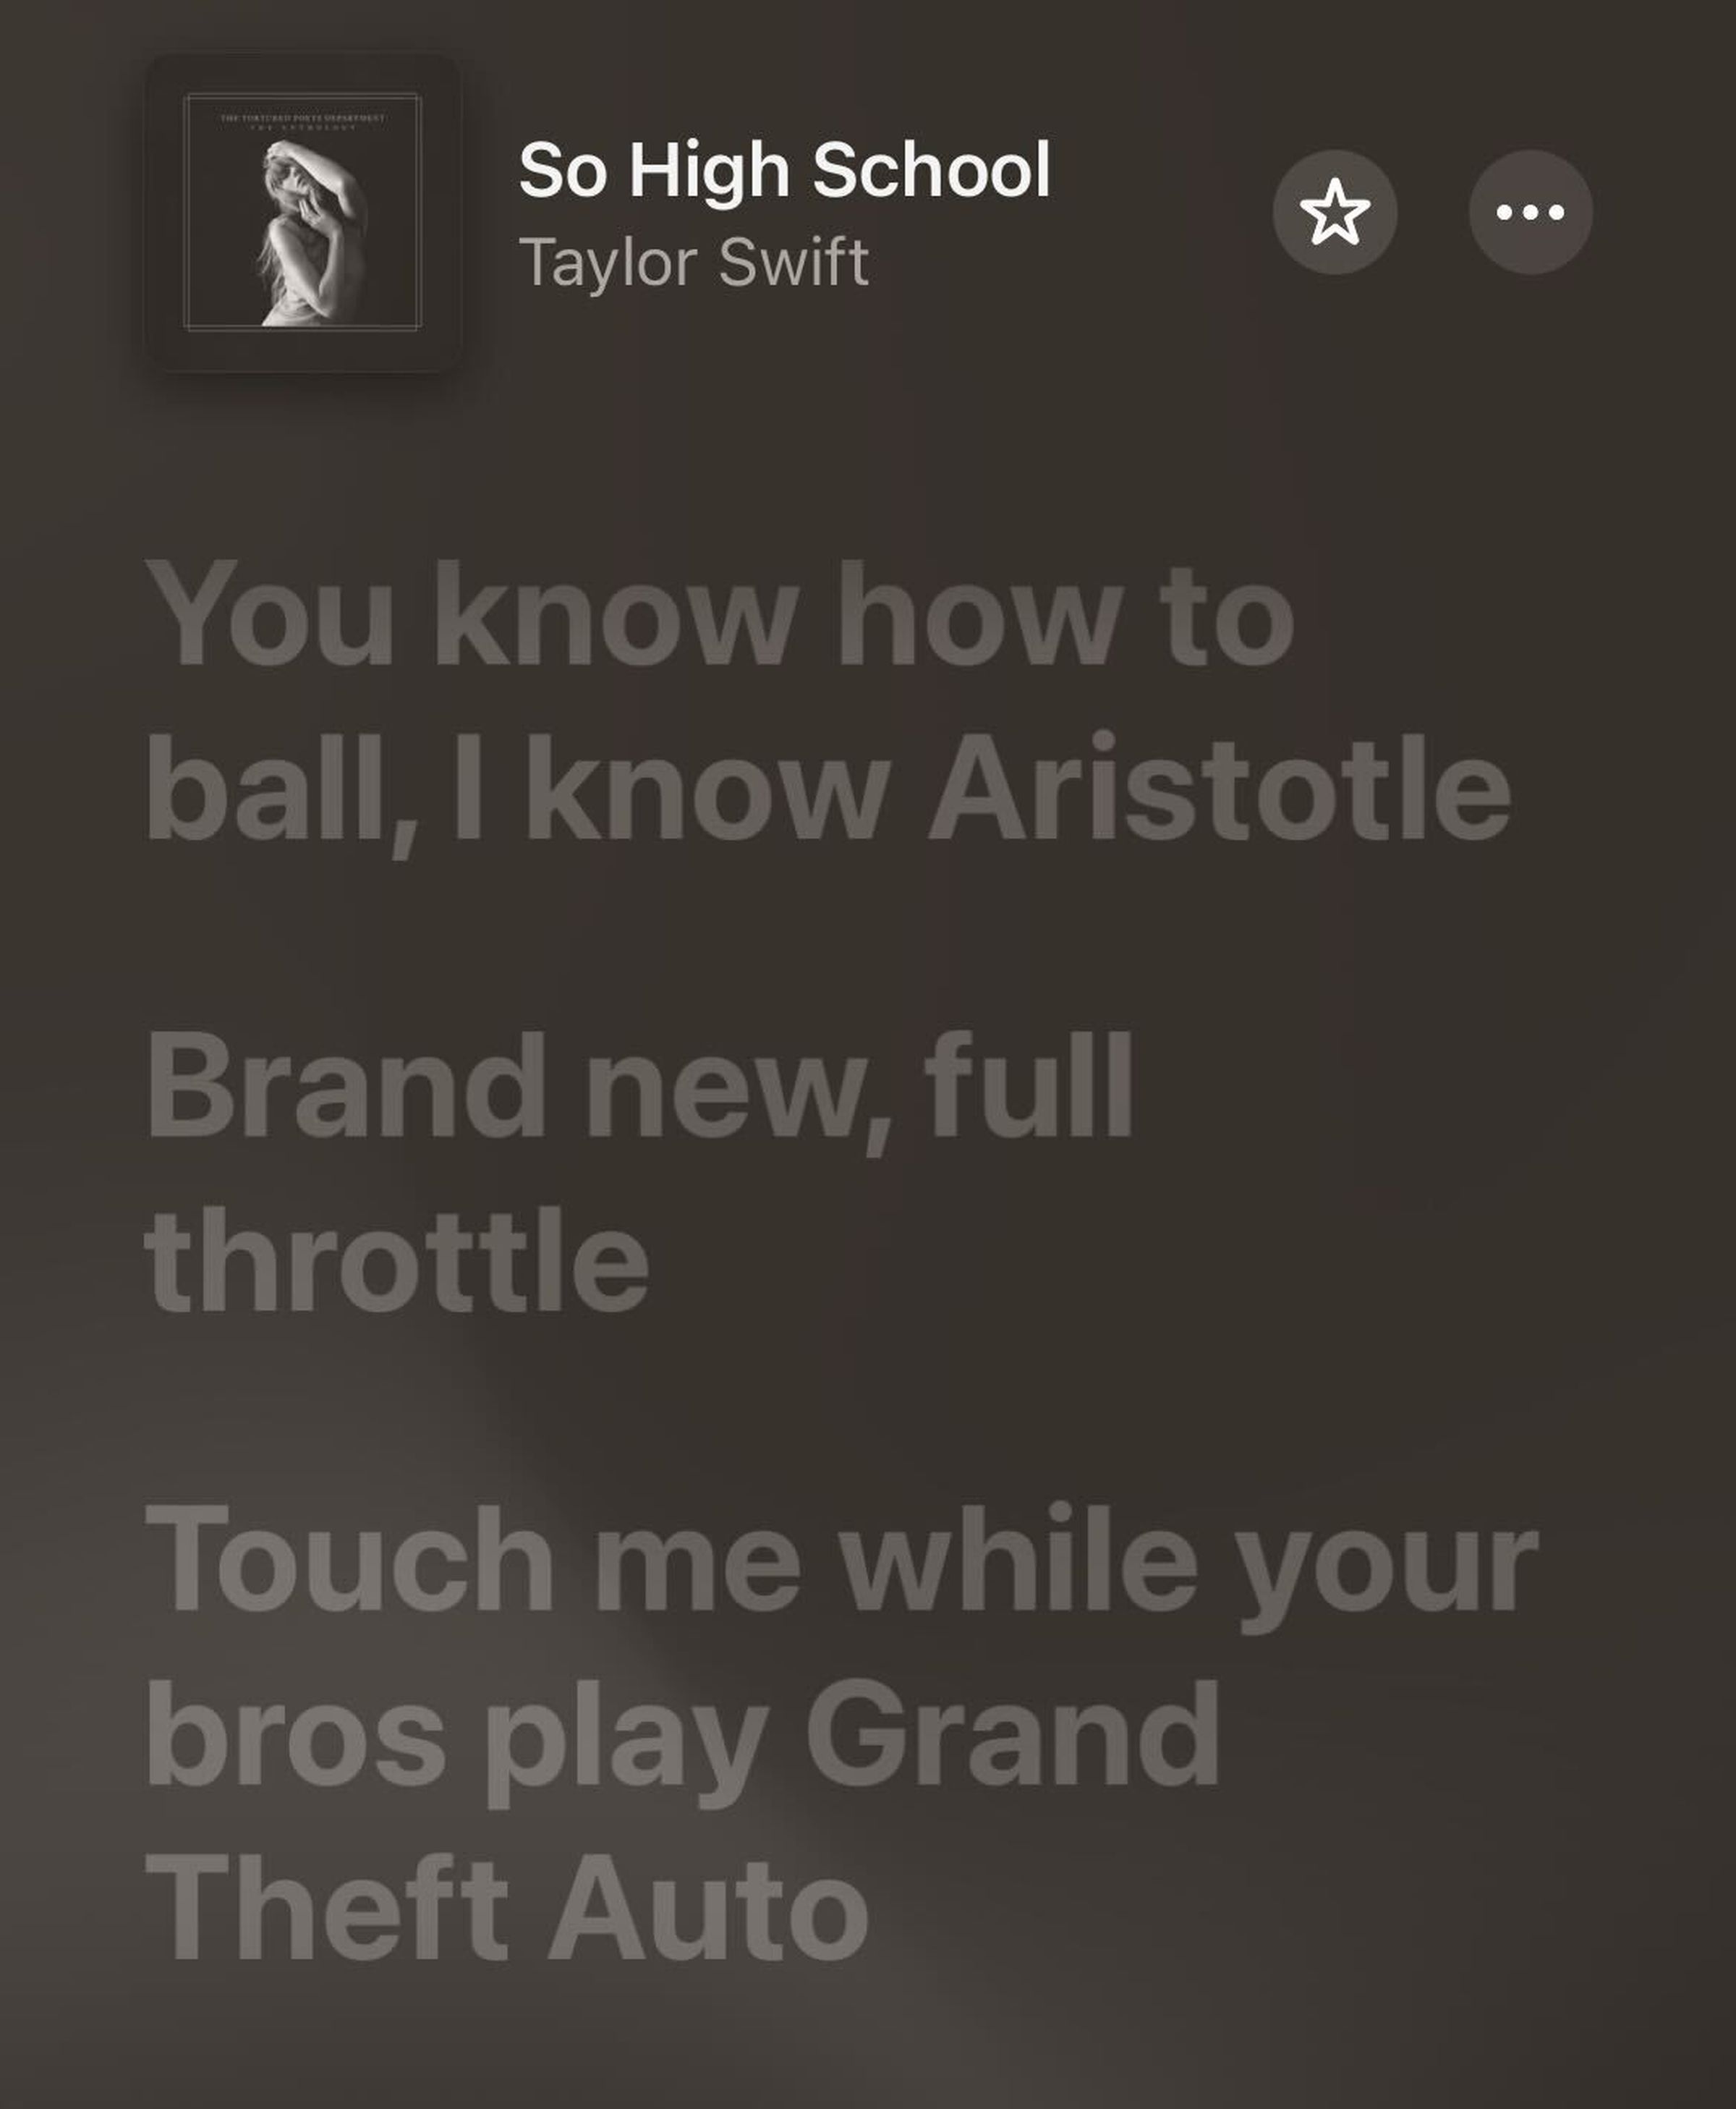 A screenshot of lyrics from the Taylor Swift song “So High School.”